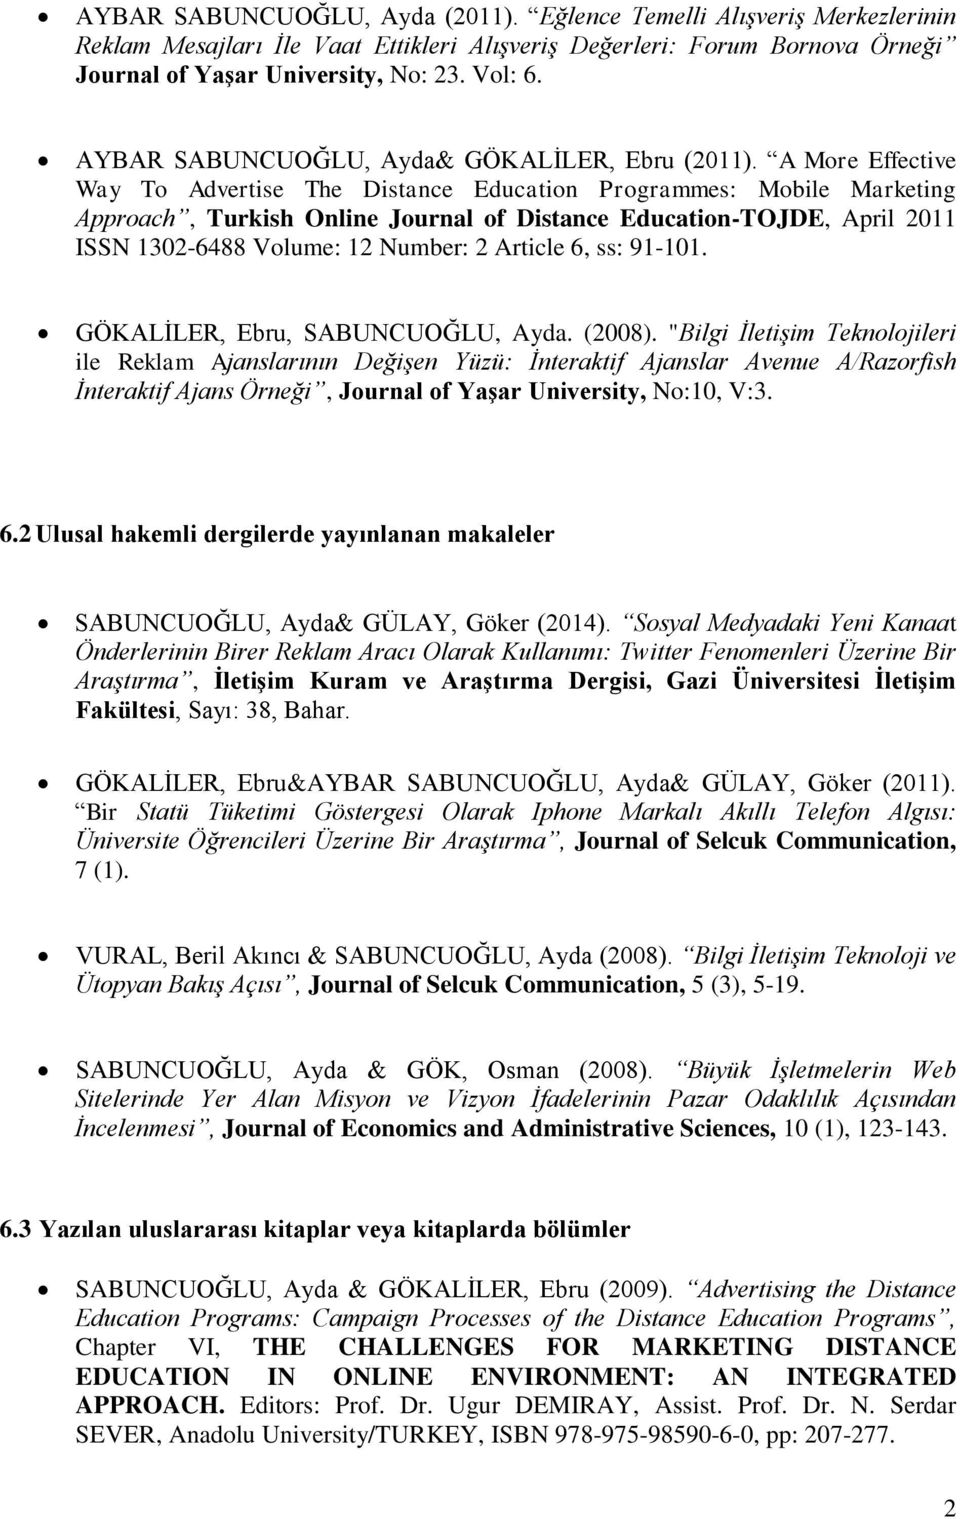 A More Effective Way To Advertise The Distance Education Programmes: Mobile Marketing Approach, Turkish Online Journal of Distance Education-TOJDE, April 2011 ISSN 1302-6488 Volume: 12 Number: 2